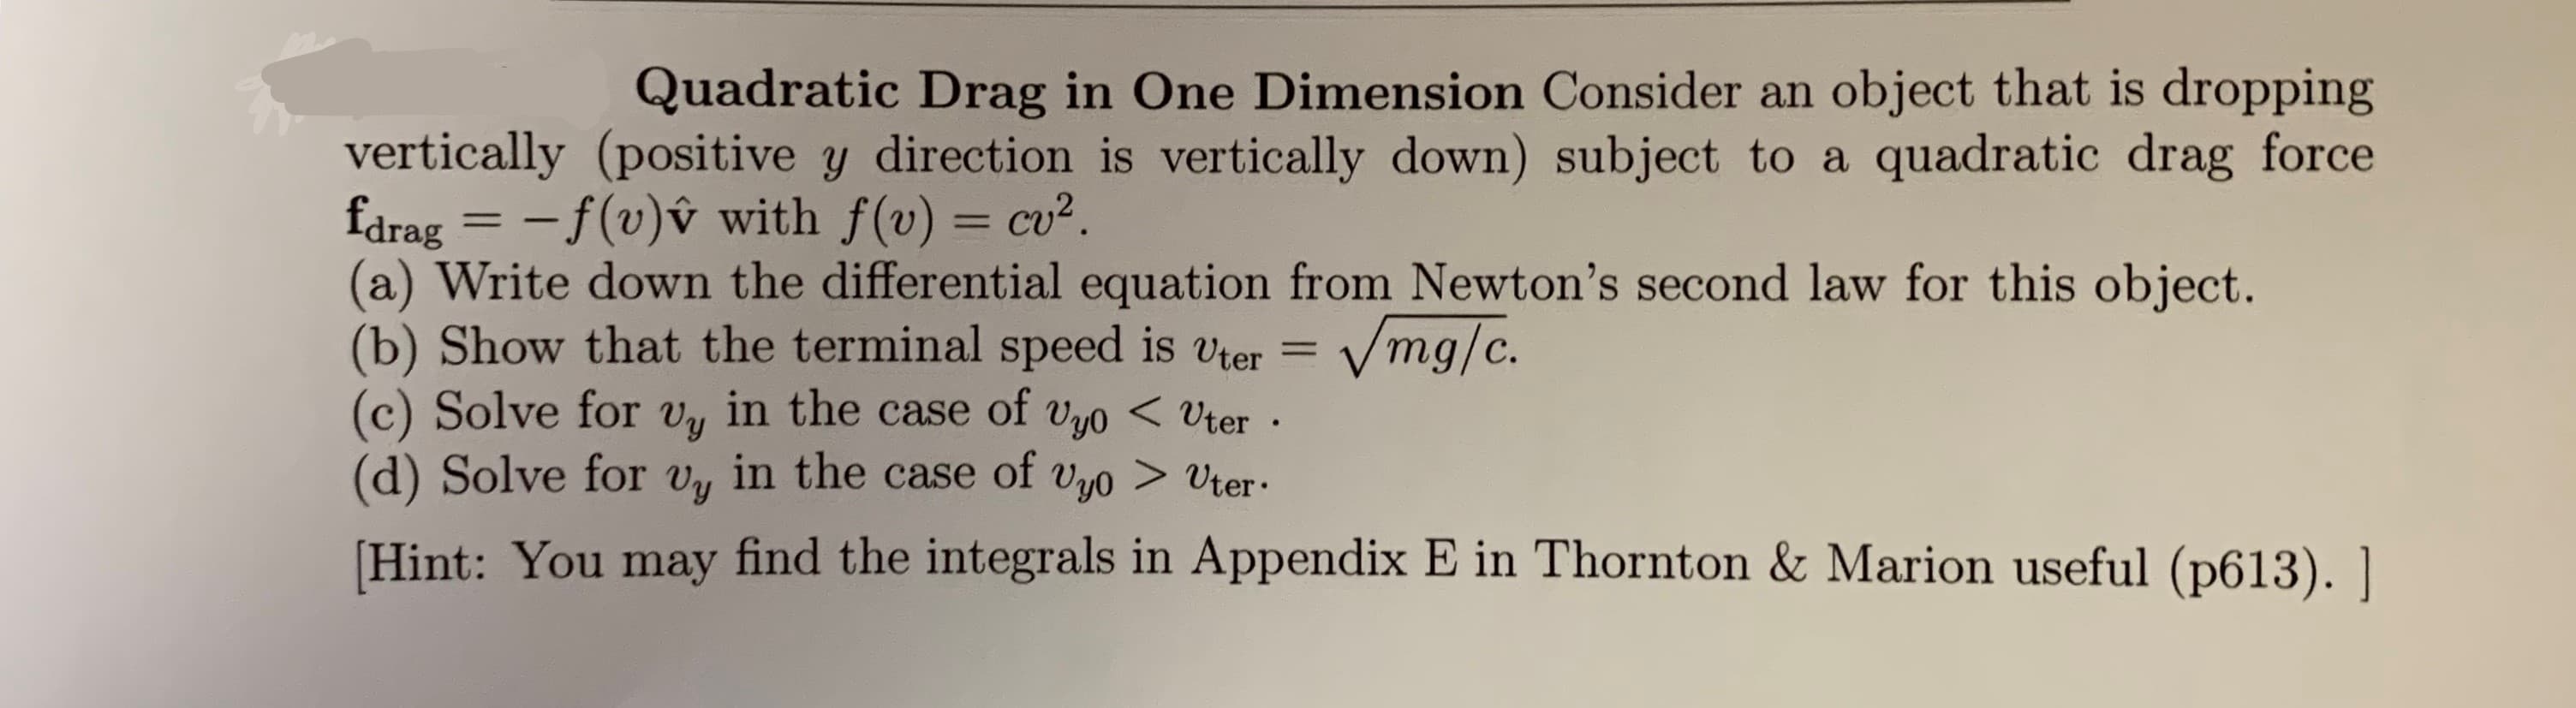 Quadratic Drag in One Dimension Consider an object that is dropping
quadratic drag force
vertically (positive y direction is vertically down) subject to a
fdrag = -f(v)v with f(v) cu2.
(a) Write down the differential equation from Newton's second law for this object.
(b) Show that the terminal speed is vter =
(c) Solve for vy in the case of vyo<Uter
(d) Solve for v in the case of vyo> Uter
Vmg/c.
Hint: You may find the integrals in Appendix E in Thornton & Marion useful (p613). |
